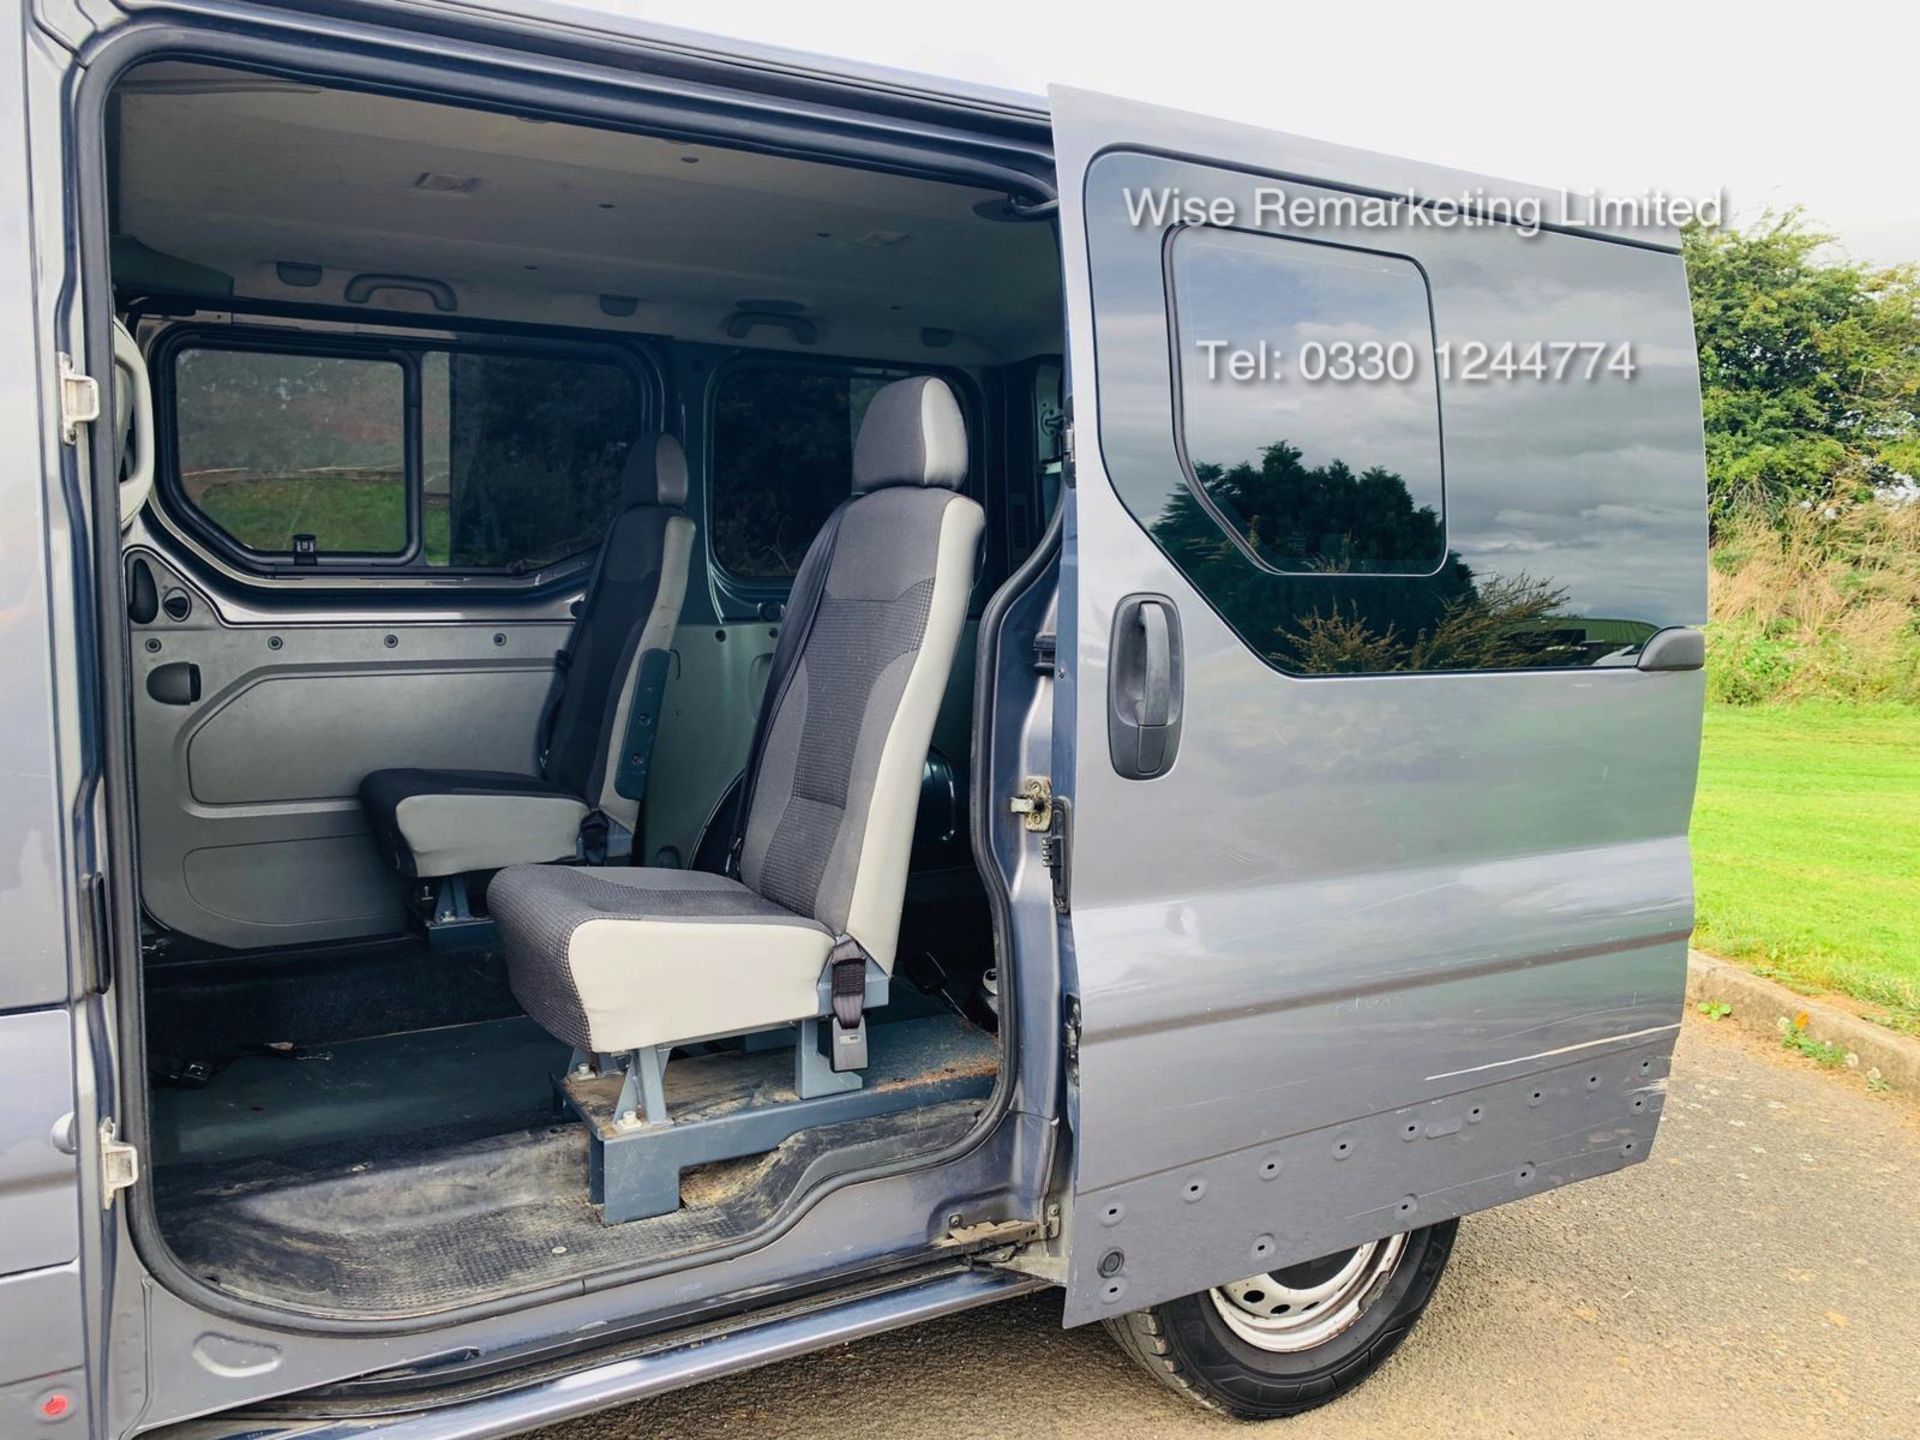 Vauxhall Vivaro 2.0 CDTI 2900 Minibus - 2014 Model - Wheel Chair Access -1 Owner From New -History - Image 10 of 21